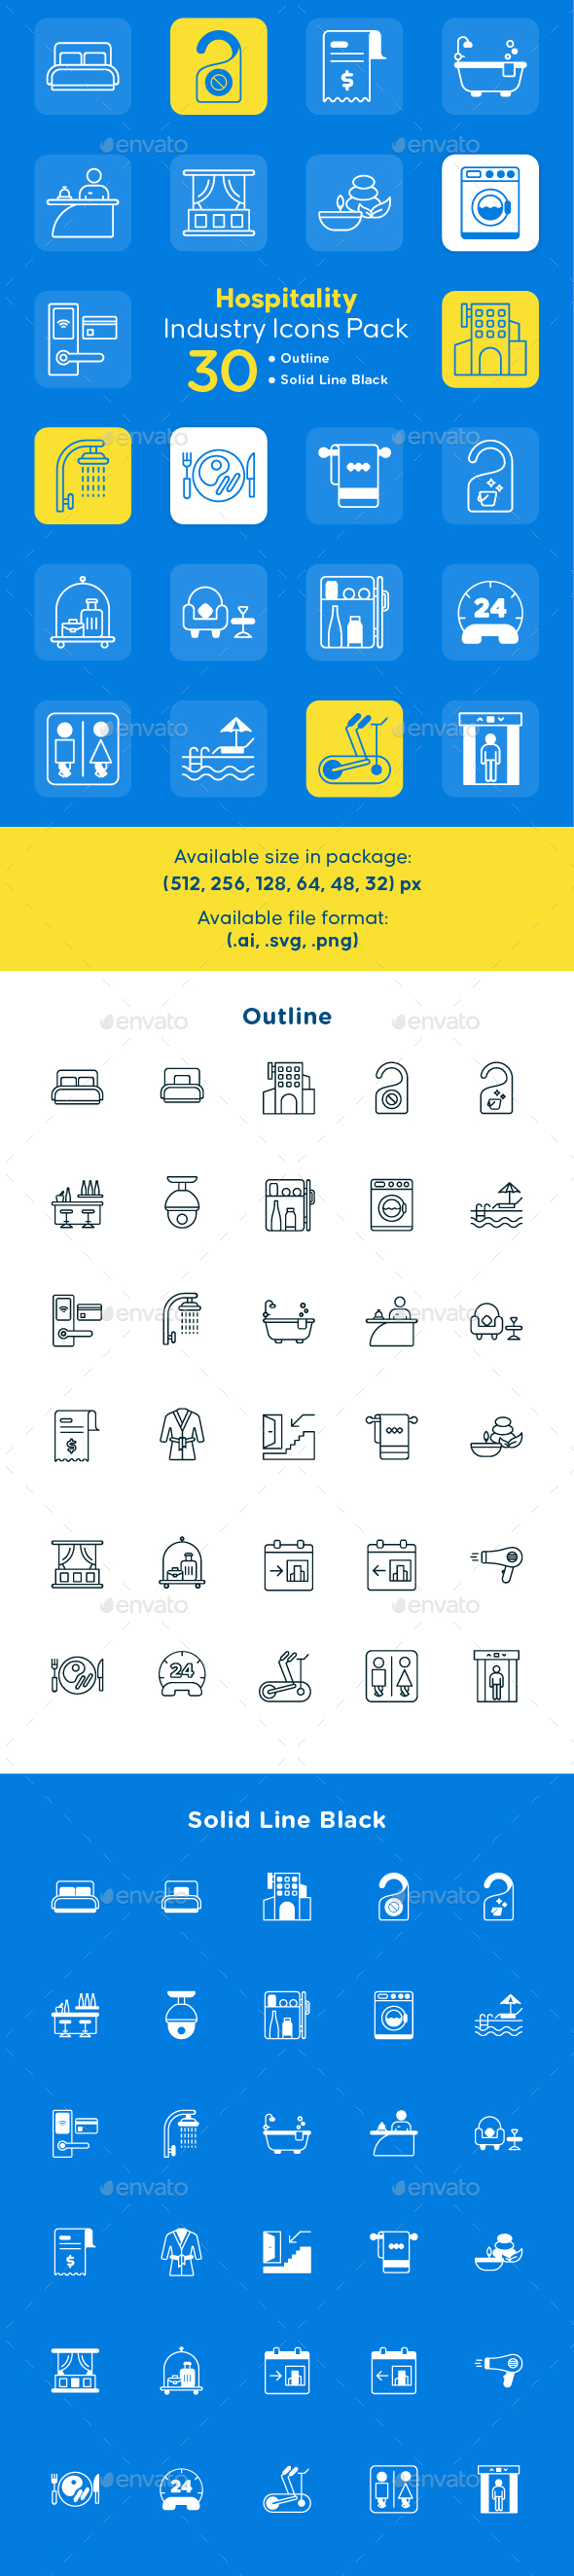 Hospitality Industry Icon Packs